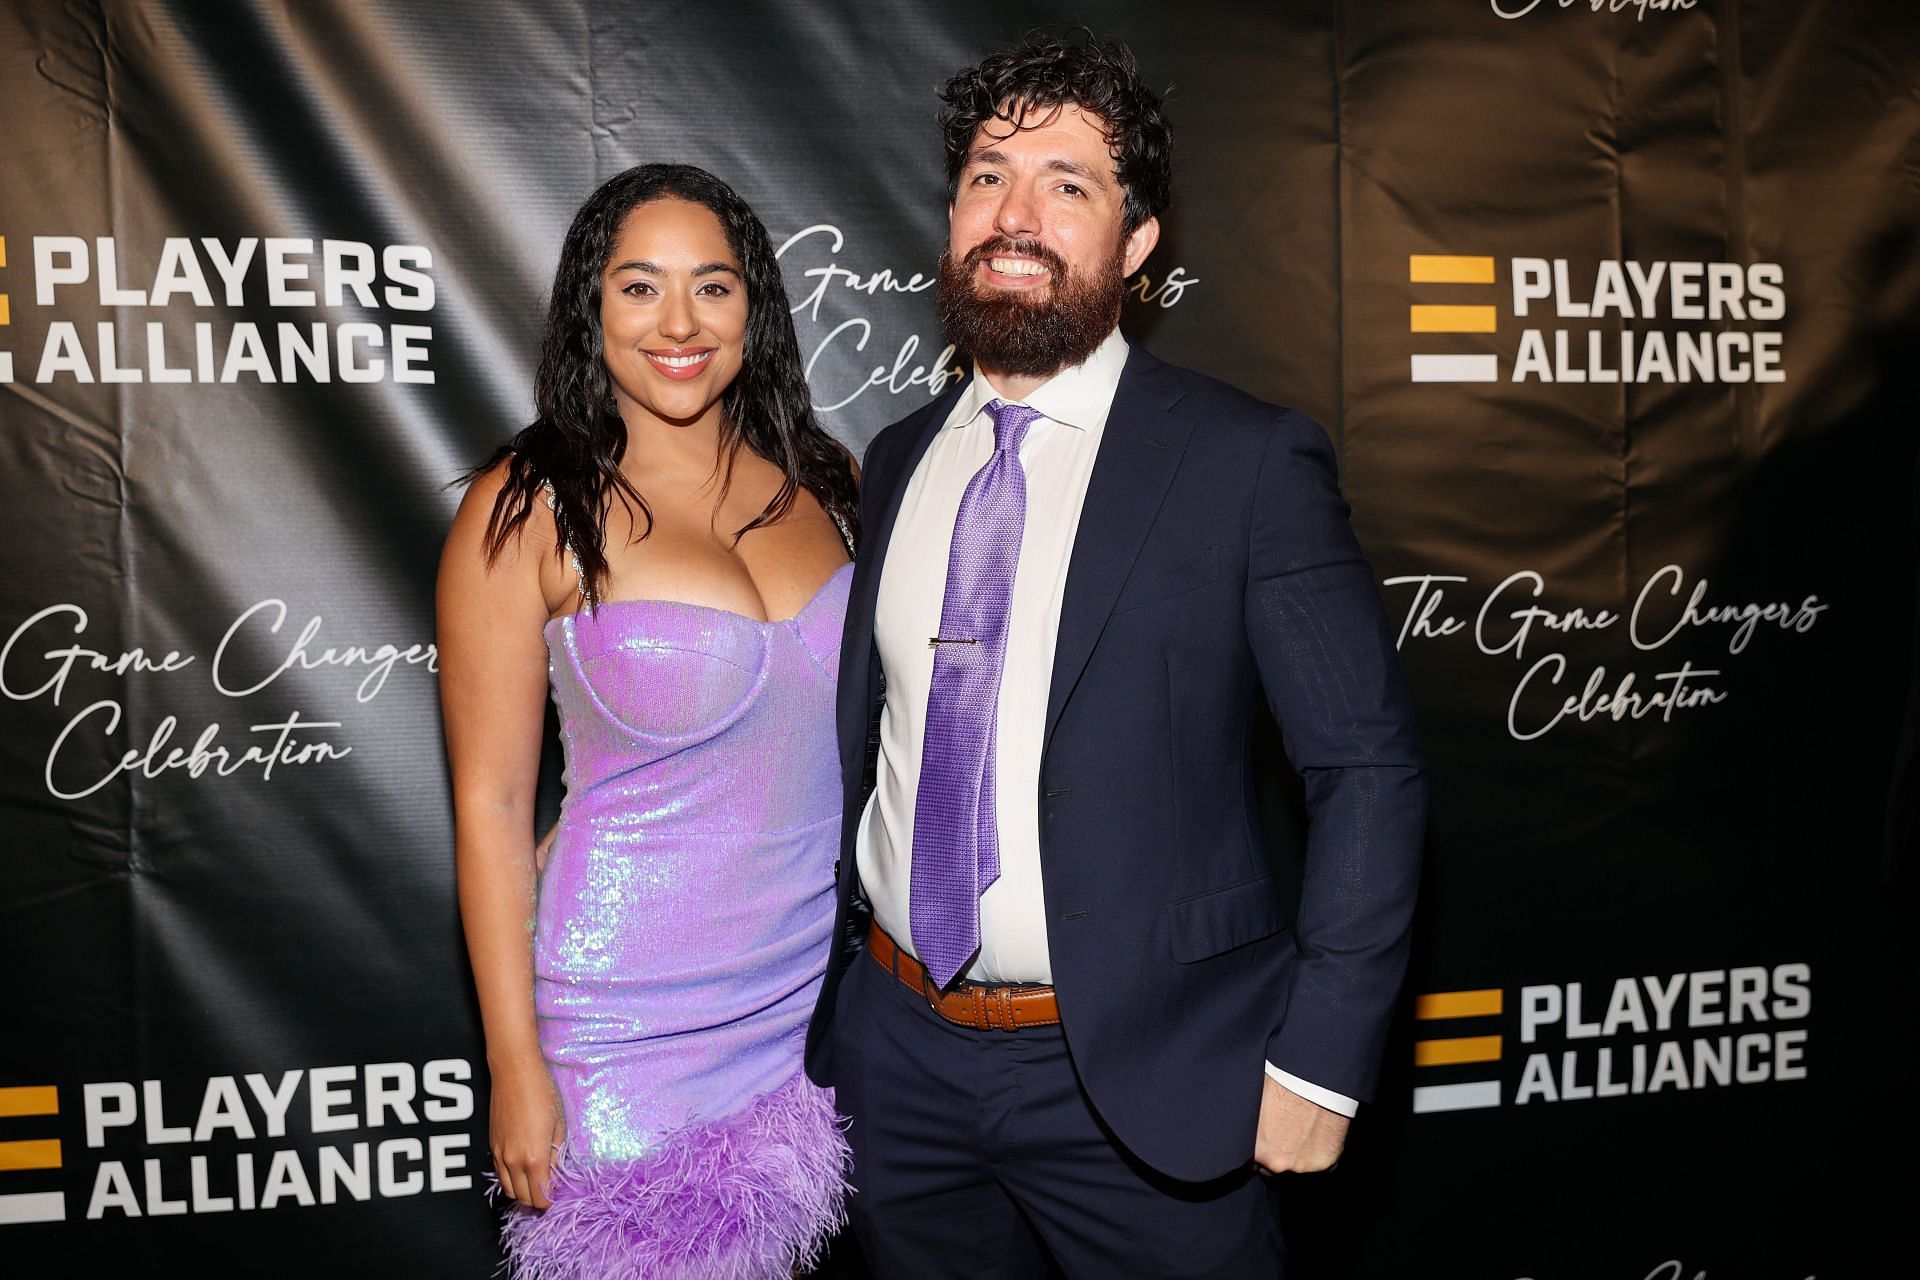 The Players Alliance Game Changers Celebration